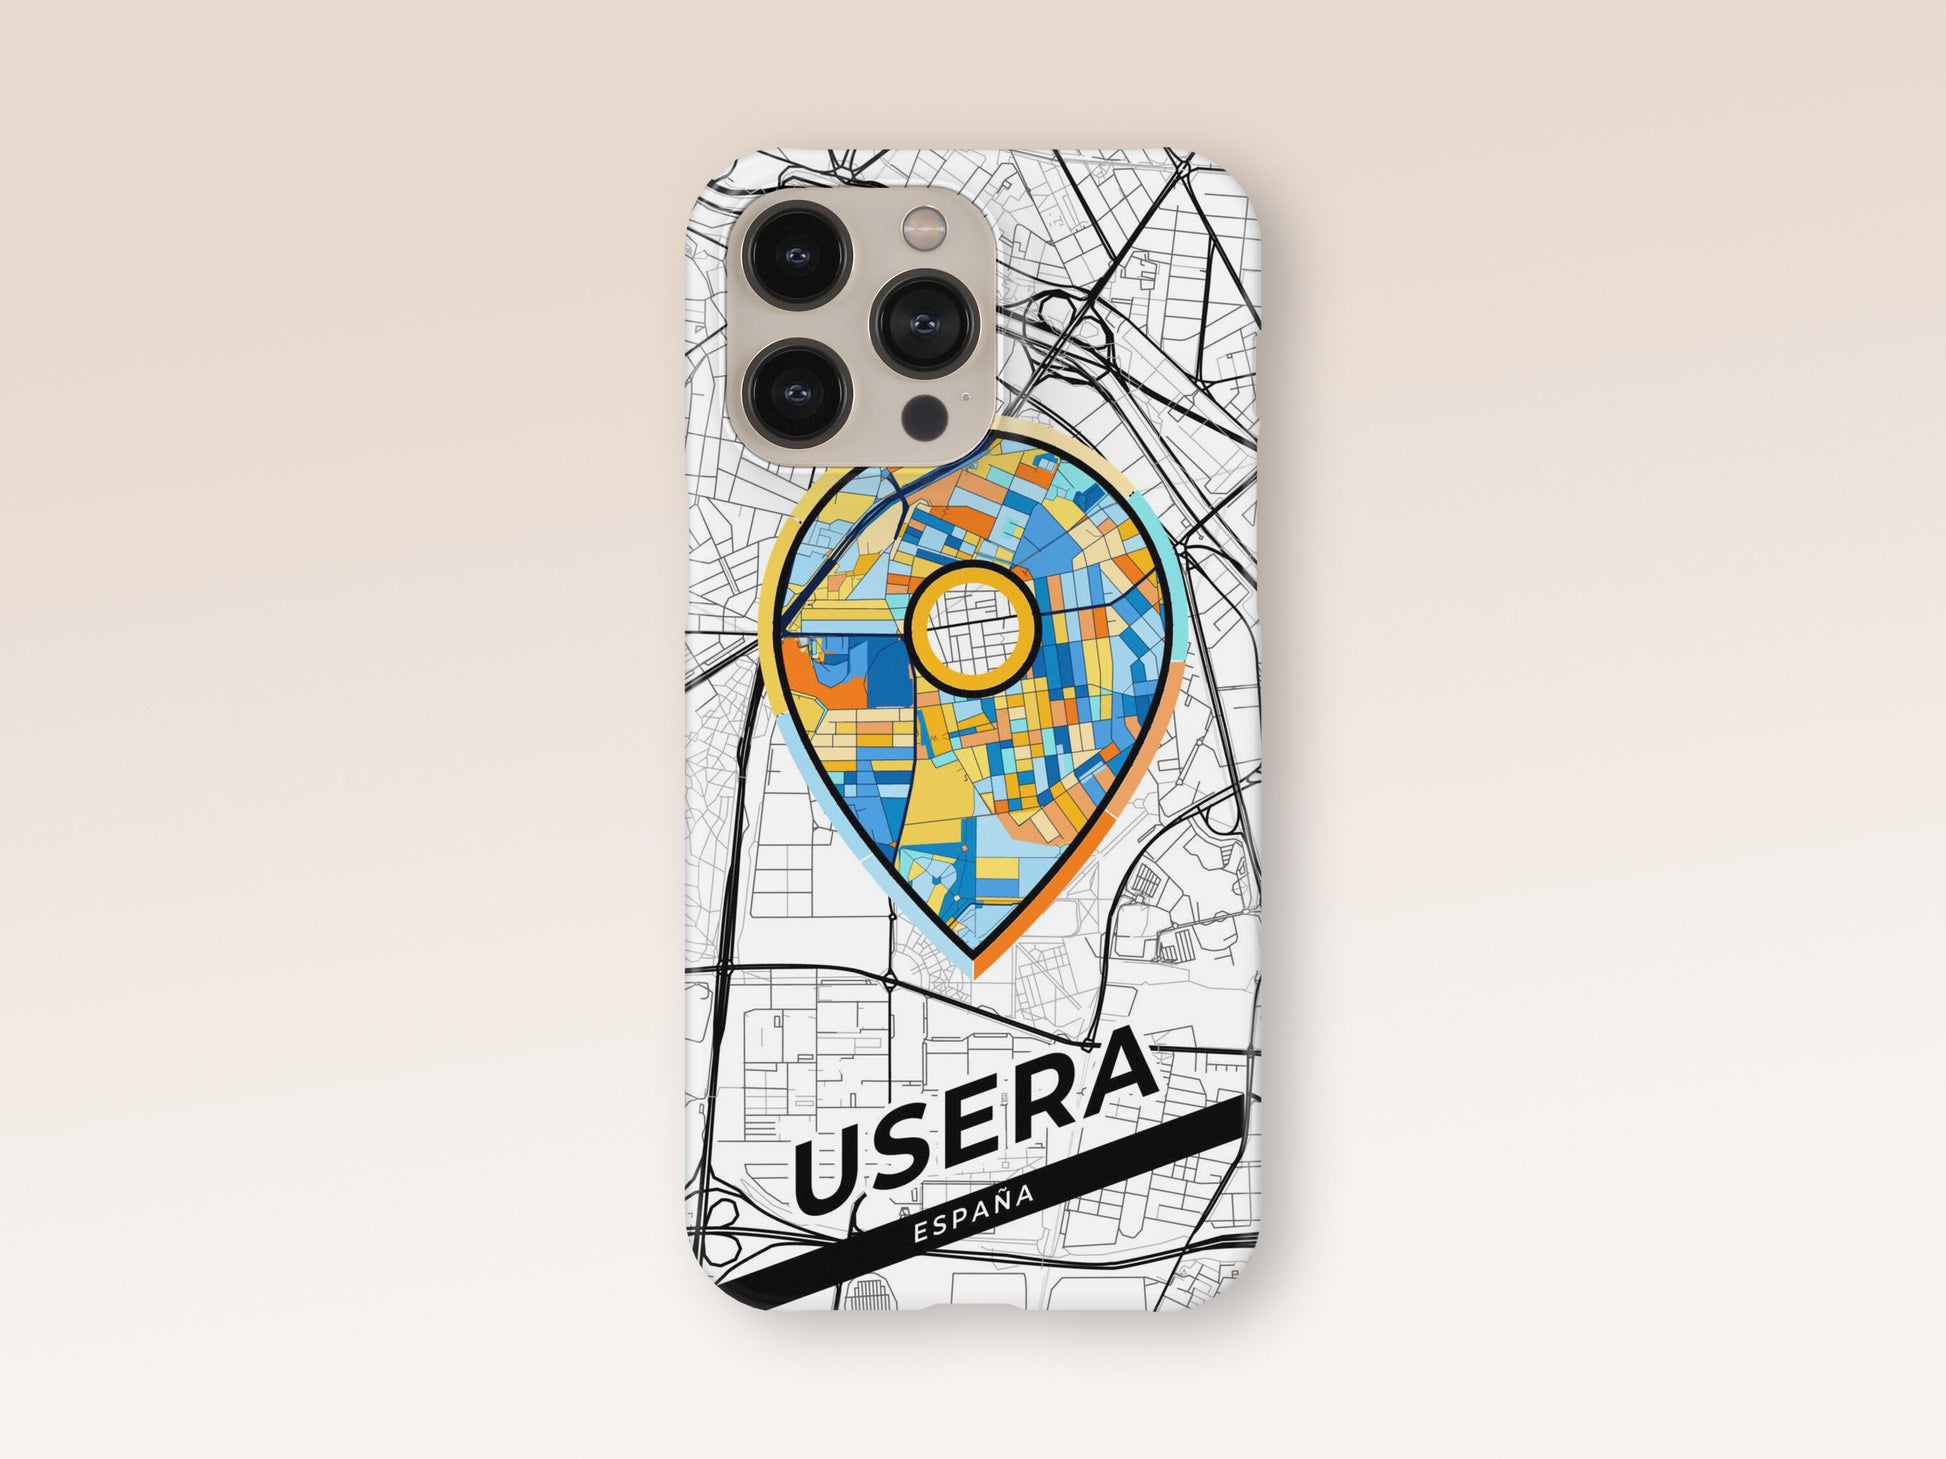 Usera Spain slim phone case with colorful icon 1